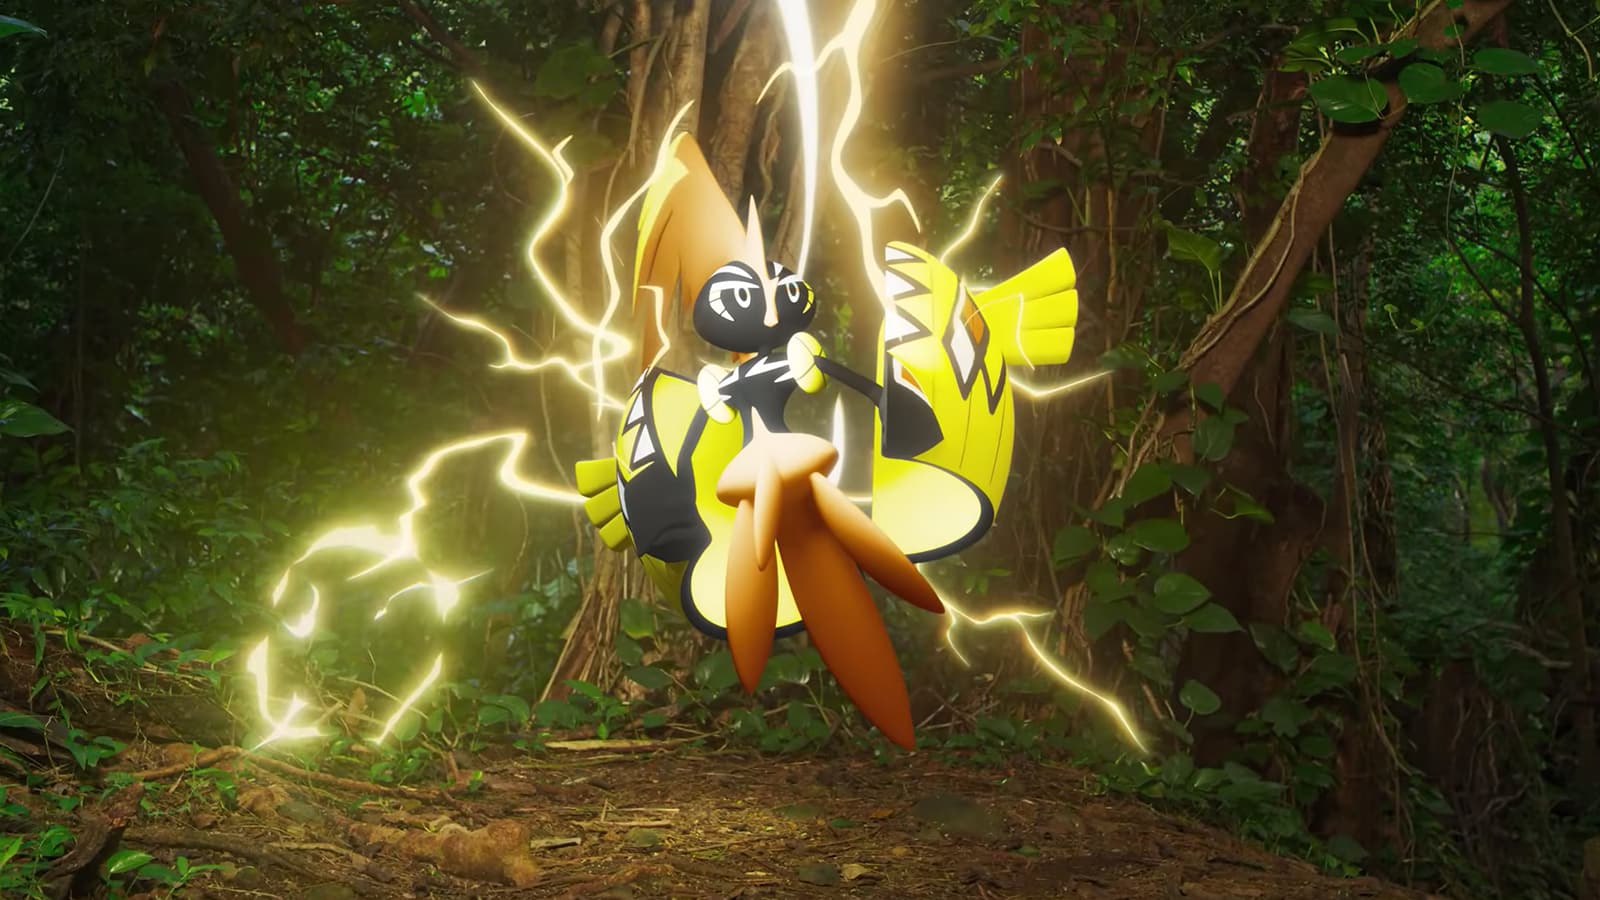 Tapu Koko appearing in Pokemon Go with its best moveset